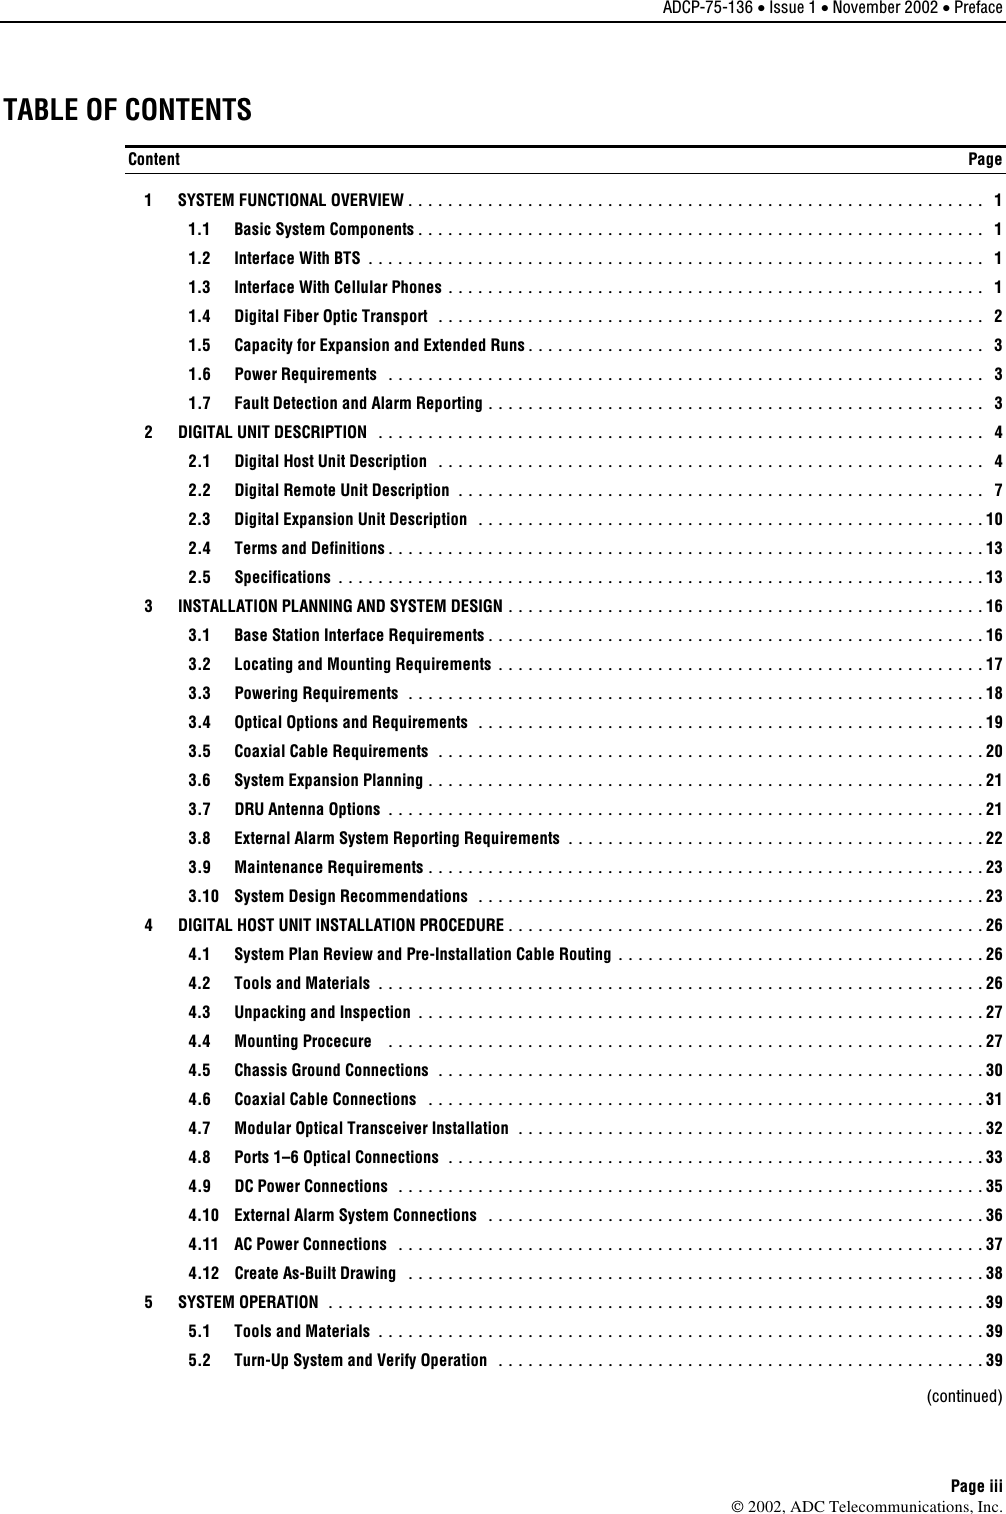 ADCP-75-136 • Issue 1 • November 2002 • Preface Page iii 2002, ADC Telecommunications, Inc.TABLE OF CONTENTS Content  Page   1  SYSTEM FUNCTIONAL OVERVIEW.......................................................... 1   1.1  Basic System Components......................................................... 1   1.2  Interface With BTS .............................................................. 1   1.3  Interface With Cellular Phones ...................................................... 1   1.4  Digital Fiber Optic Transport ....................................................... 2   1.5  Capacity for Expansion and Extended Runs.............................................. 3  1.6 Power Requirements ............................................................ 3   1.7  Fault Detection and Alarm Reporting .................................................. 3   2  DIGITAL UNIT DESCRIPTION ............................................................. 4   2.1  Digital Host Unit Description ....................................................... 4   2.2  Digital Remote Unit Description ..................................................... 7   2.3  Digital Expansion Unit Description ................................................... 10   2.4  Terms and Definitions............................................................ 13  2.5 Specifications ................................................................. 13   3  INSTALLATION PLANNING AND SYSTEM DESIGN ................................................ 16   3.1  Base Station Interface Requirements.................................................. 16   3.2  Locating and Mounting Requirements .................................................17  3.3 Powering Requirements ..........................................................18   3.4  Optical Options and Requirements ...................................................19   3.5  Coaxial Cable Requirements .......................................................20   3.6  System Expansion Planning ........................................................ 21  3.7 DRU Antenna Options ............................................................ 21   3.8  External Alarm System Reporting Requirements .......................................... 22  3.9 Maintenance Requirements........................................................ 23   3.10  System Design Recommendations ................................................... 23   4  DIGITAL HOST UNIT INSTALLATION PROCEDURE................................................ 26   4.1  System Plan Review and Pre-Installation Cable Routing ..................................... 26   4.2  Tools and Materials ............................................................. 26   4.3  Unpacking and Inspection ......................................................... 27  4.4 Mounting Procecure ............................................................ 27   4.5  Chassis Ground Connections ....................................................... 30   4.6  Coaxial Cable Connections ........................................................31   4.7  Modular Optical Transceiver Installation ............................................... 32   4.8  Ports 1–6 Optical Connections ...................................................... 33  4.9 DC Power Connections ........................................................... 35   4.10  External Alarm System Connections .................................................. 36   4.11  AC Power Connections ........................................................... 37   4.12  Create As-Built Drawing .......................................................... 38  5  SYSTEM OPERATION ..................................................................39   5.1  Tools and Materials ............................................................. 39   5.2  Turn-Up System and Verify Operation ................................................. 39  (continued) 